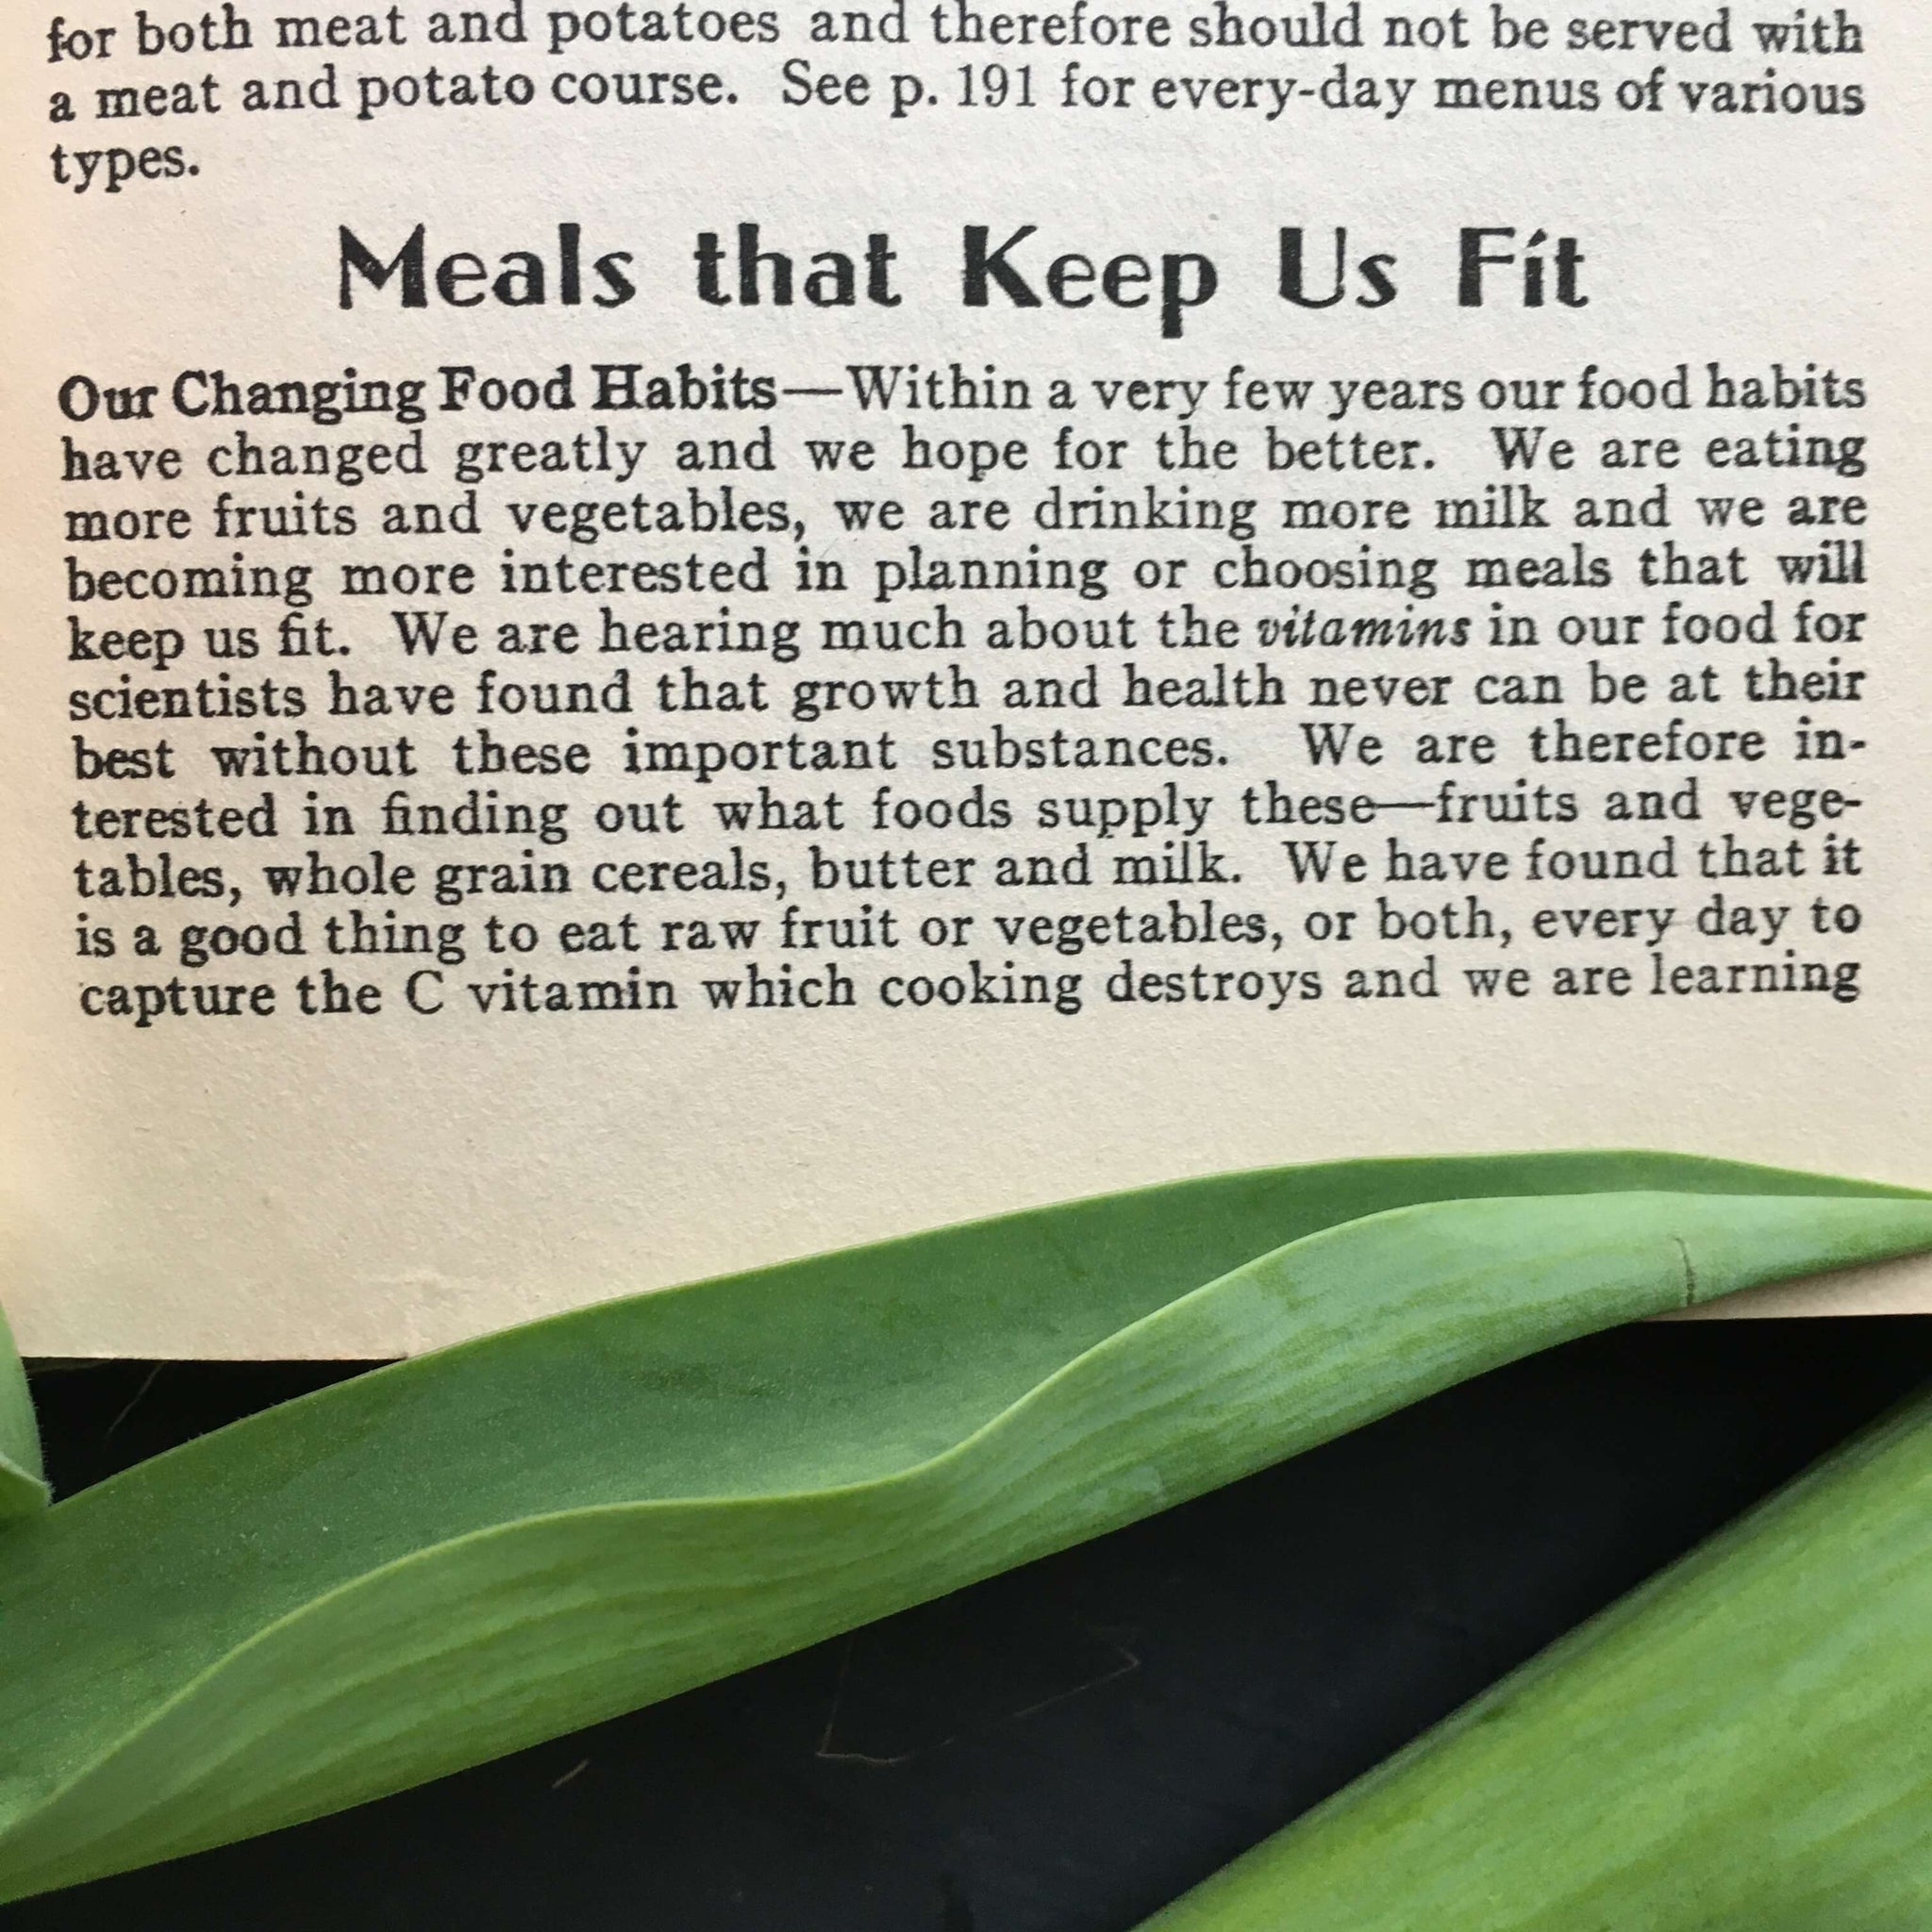 Vintage 1930's Cookbook - Good Housekeeping's Book of Meals Tested, Tasted and Approved, 1930 Second Edition